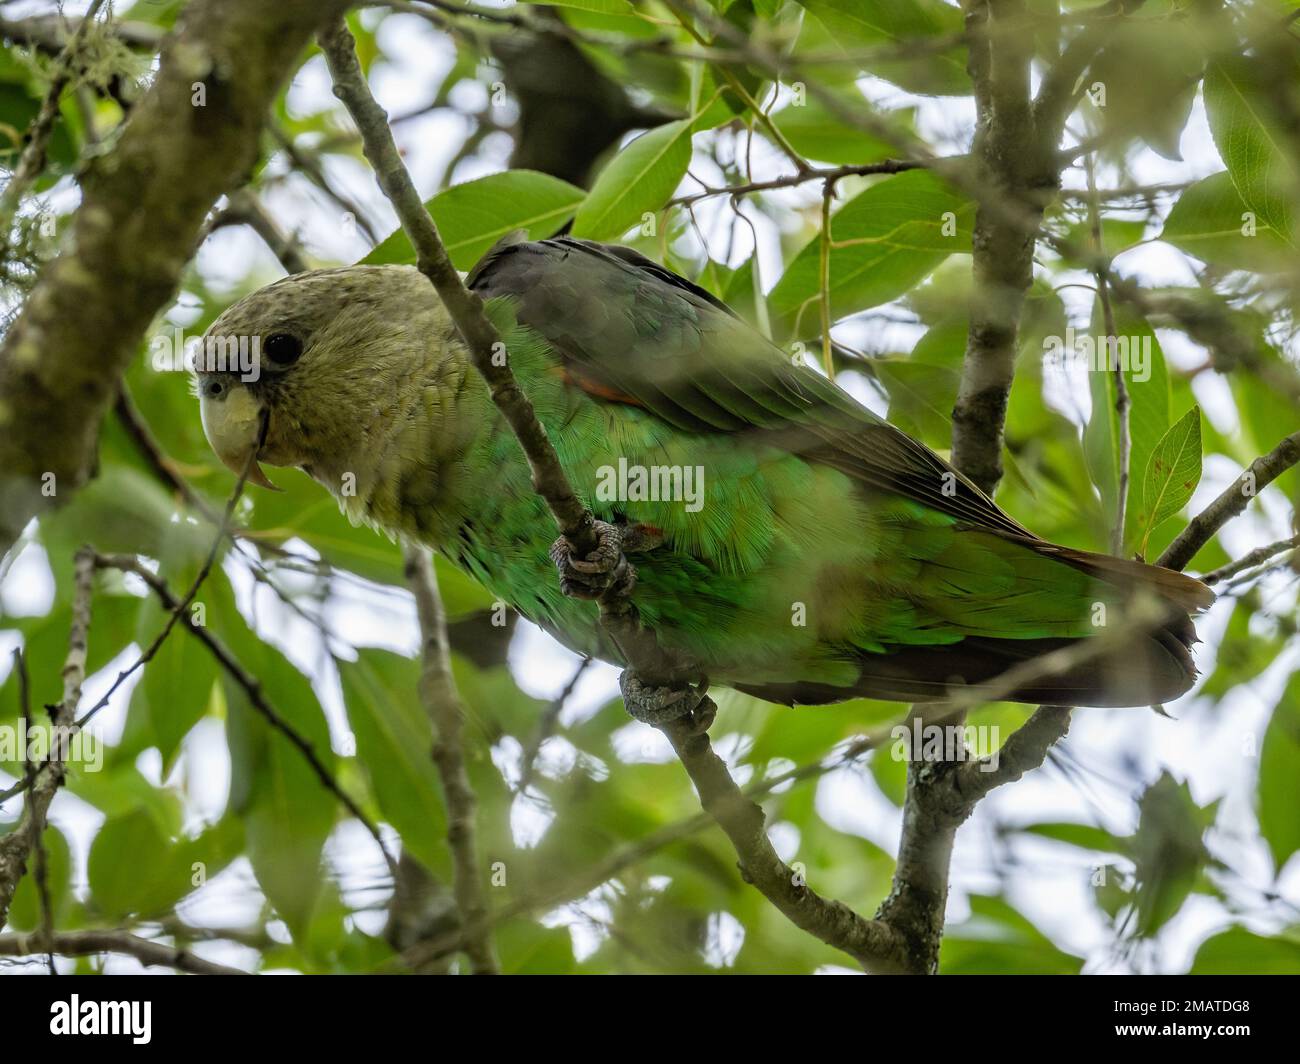 A Cape Parrot (Poicephalus robustus) perched in a tree. Tzaneen, Limpopo, South Africa. Stock Photo